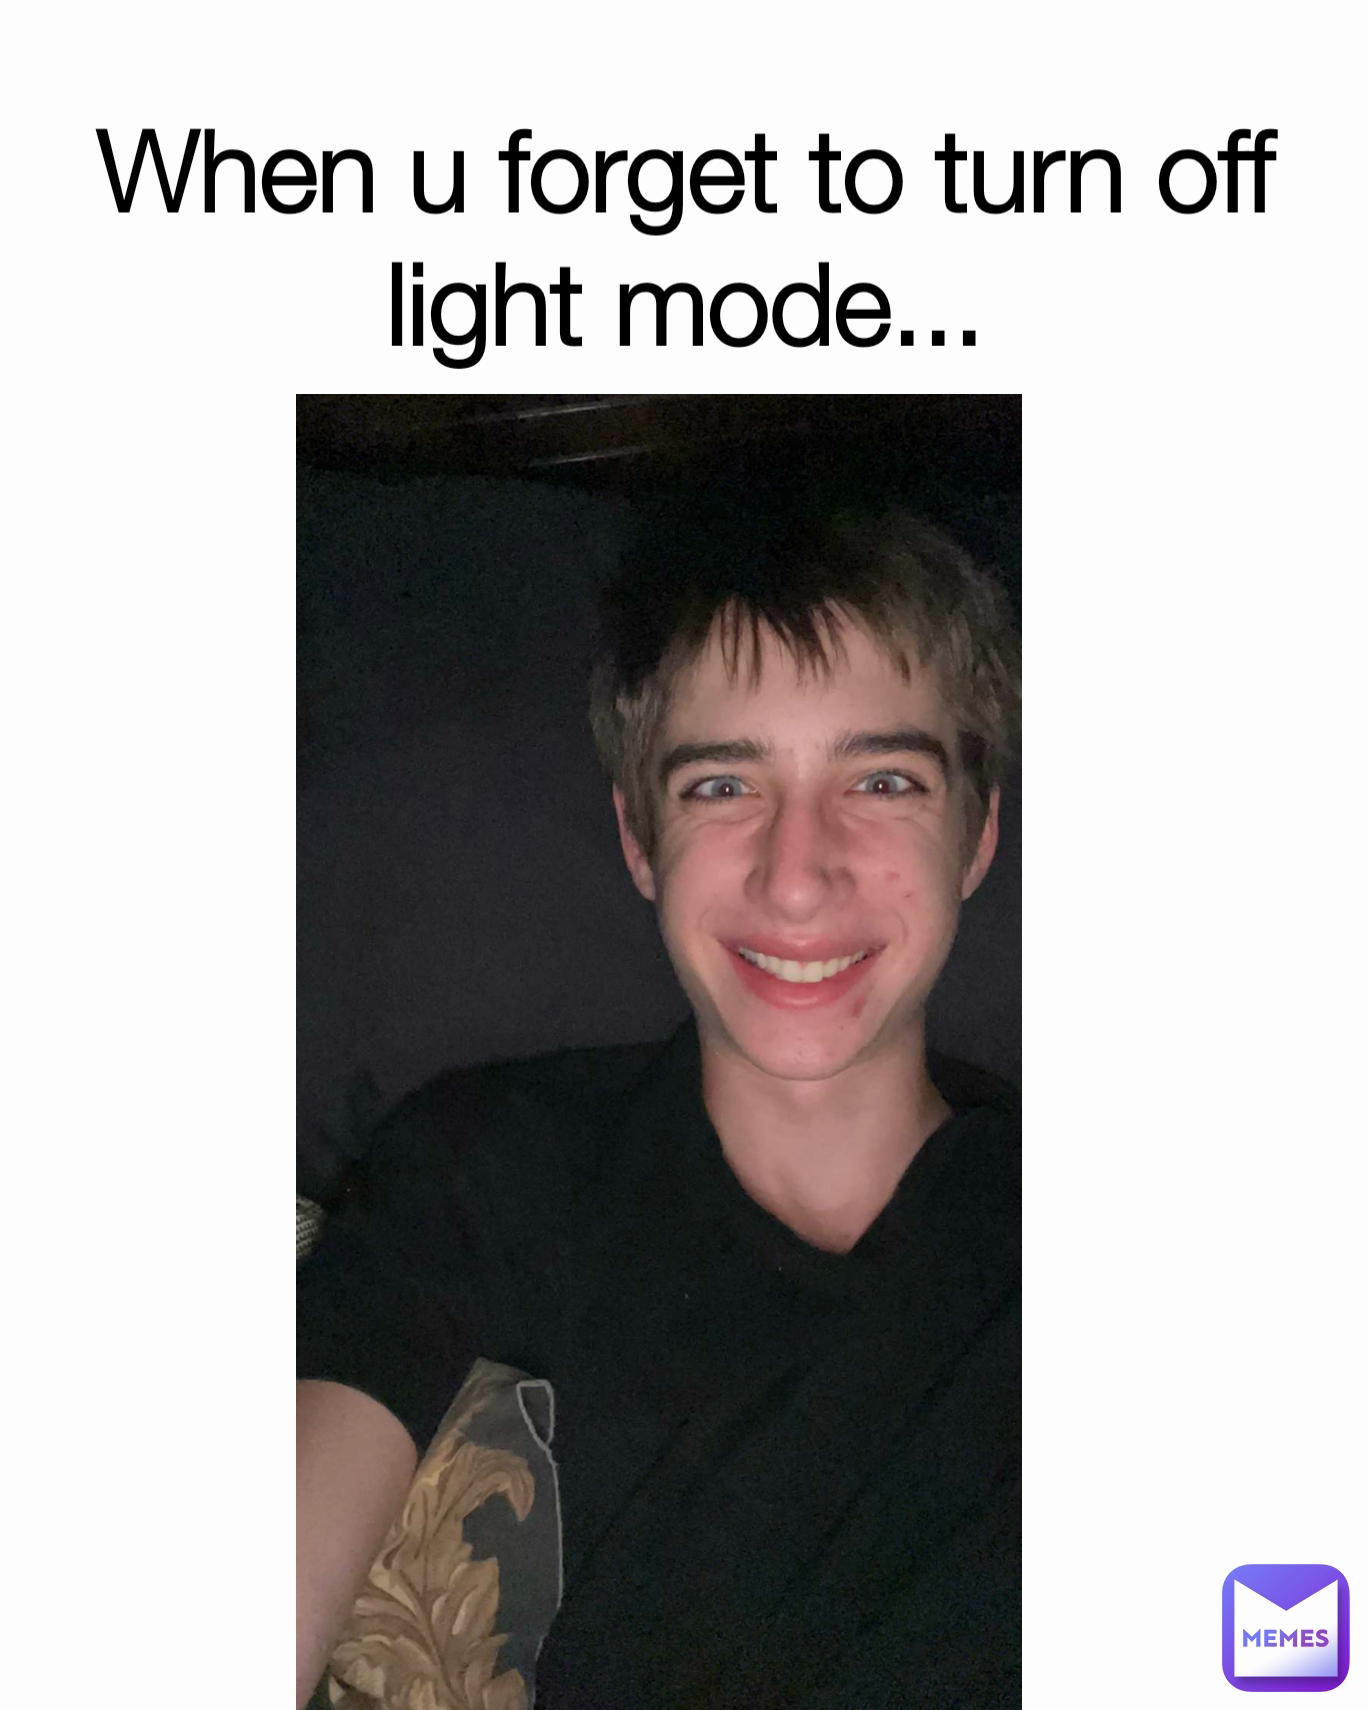 When u forget to turn off light mode...